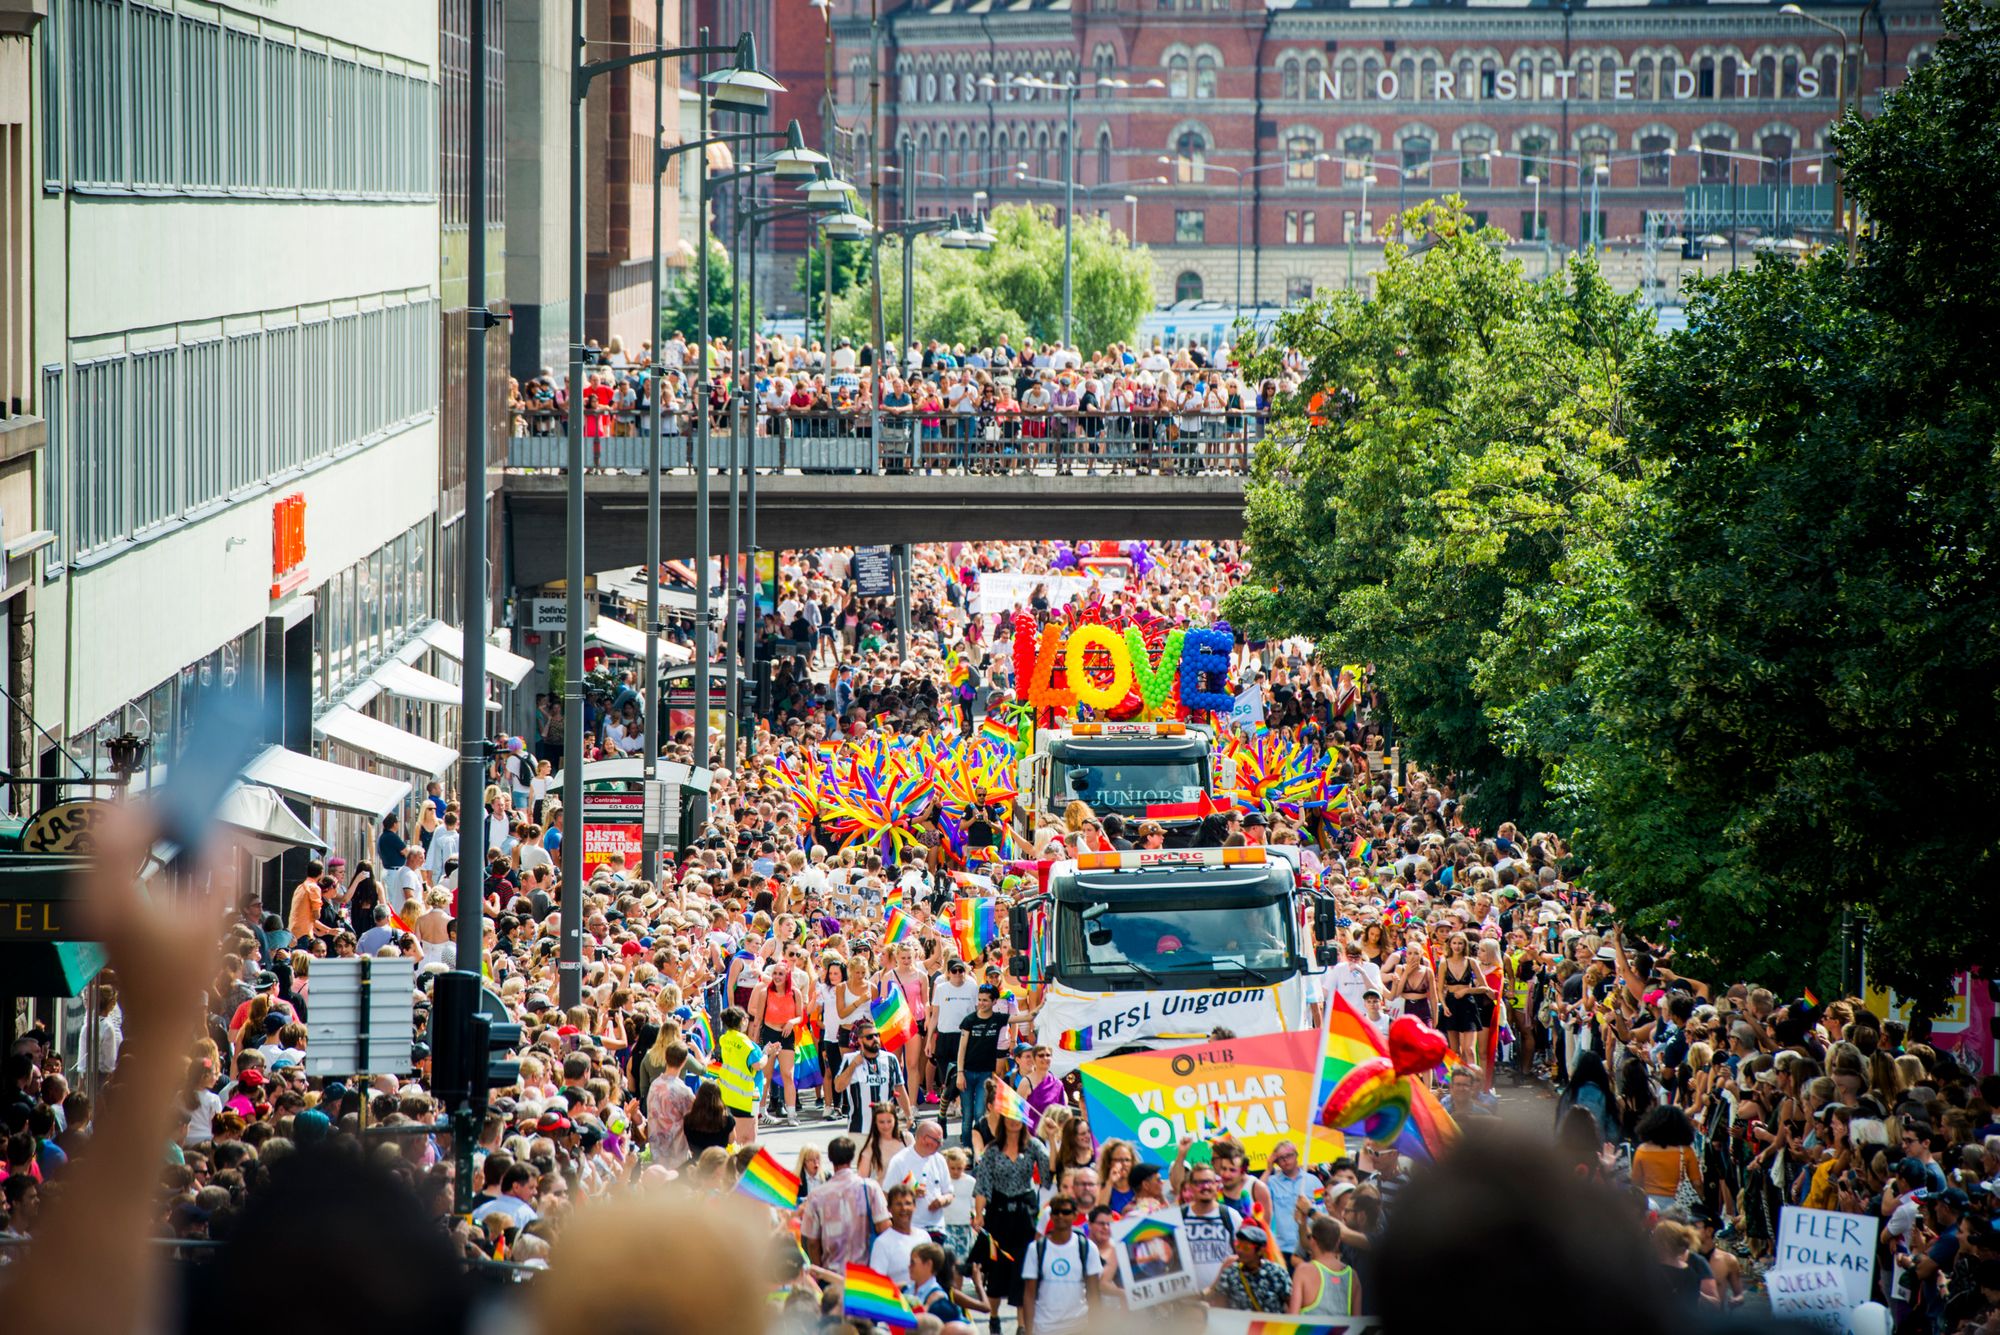 A photo of the Stockholm Pride